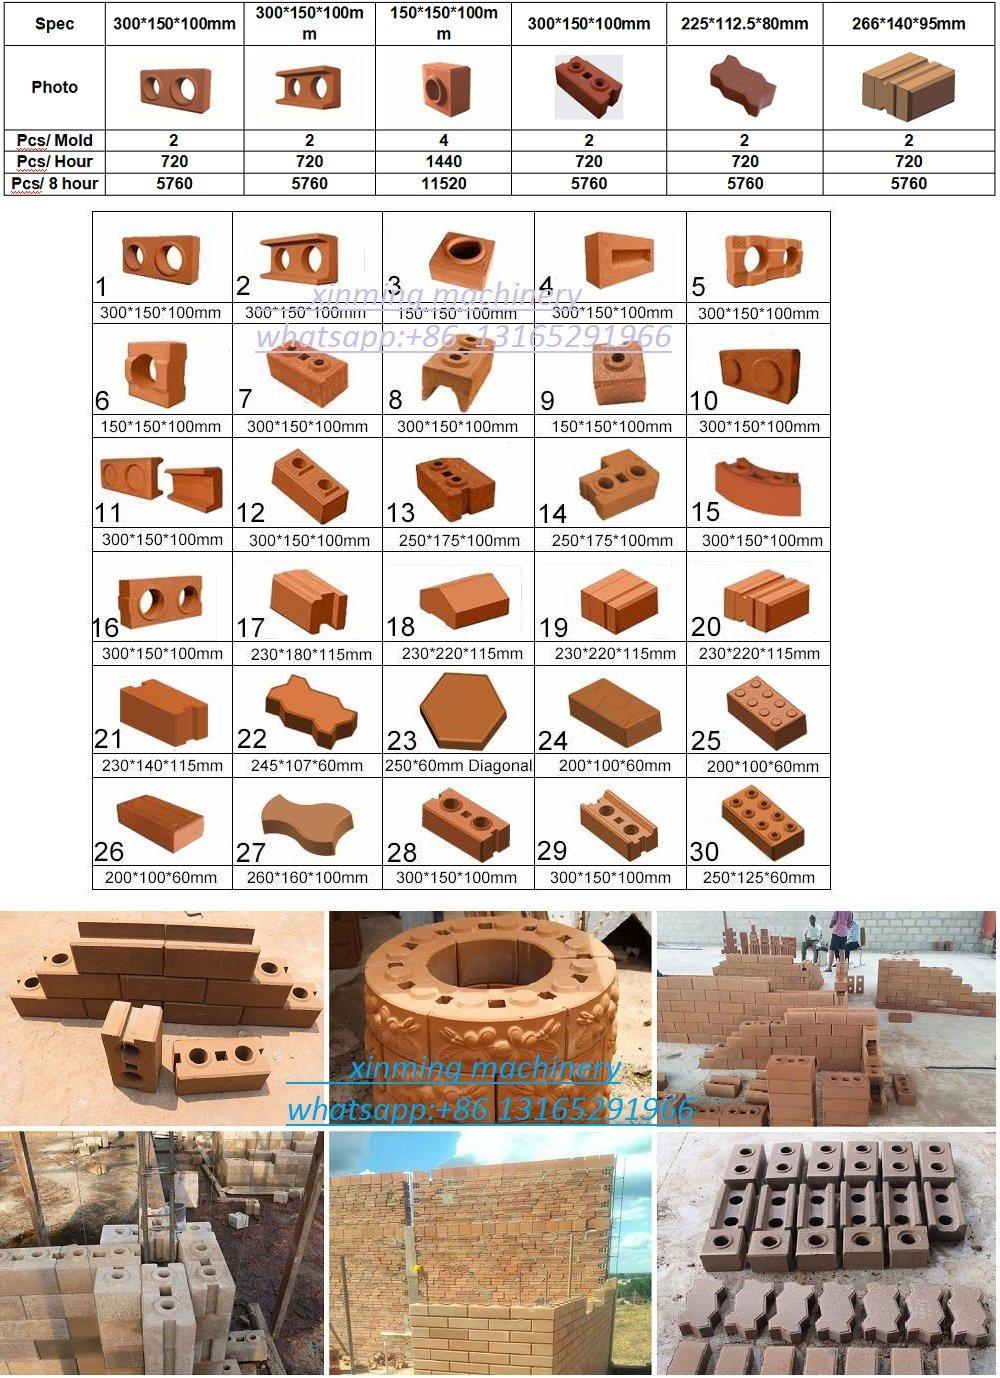 Xinming Moveable M7m2 Lego Clay Block Making Machine with Factory Price